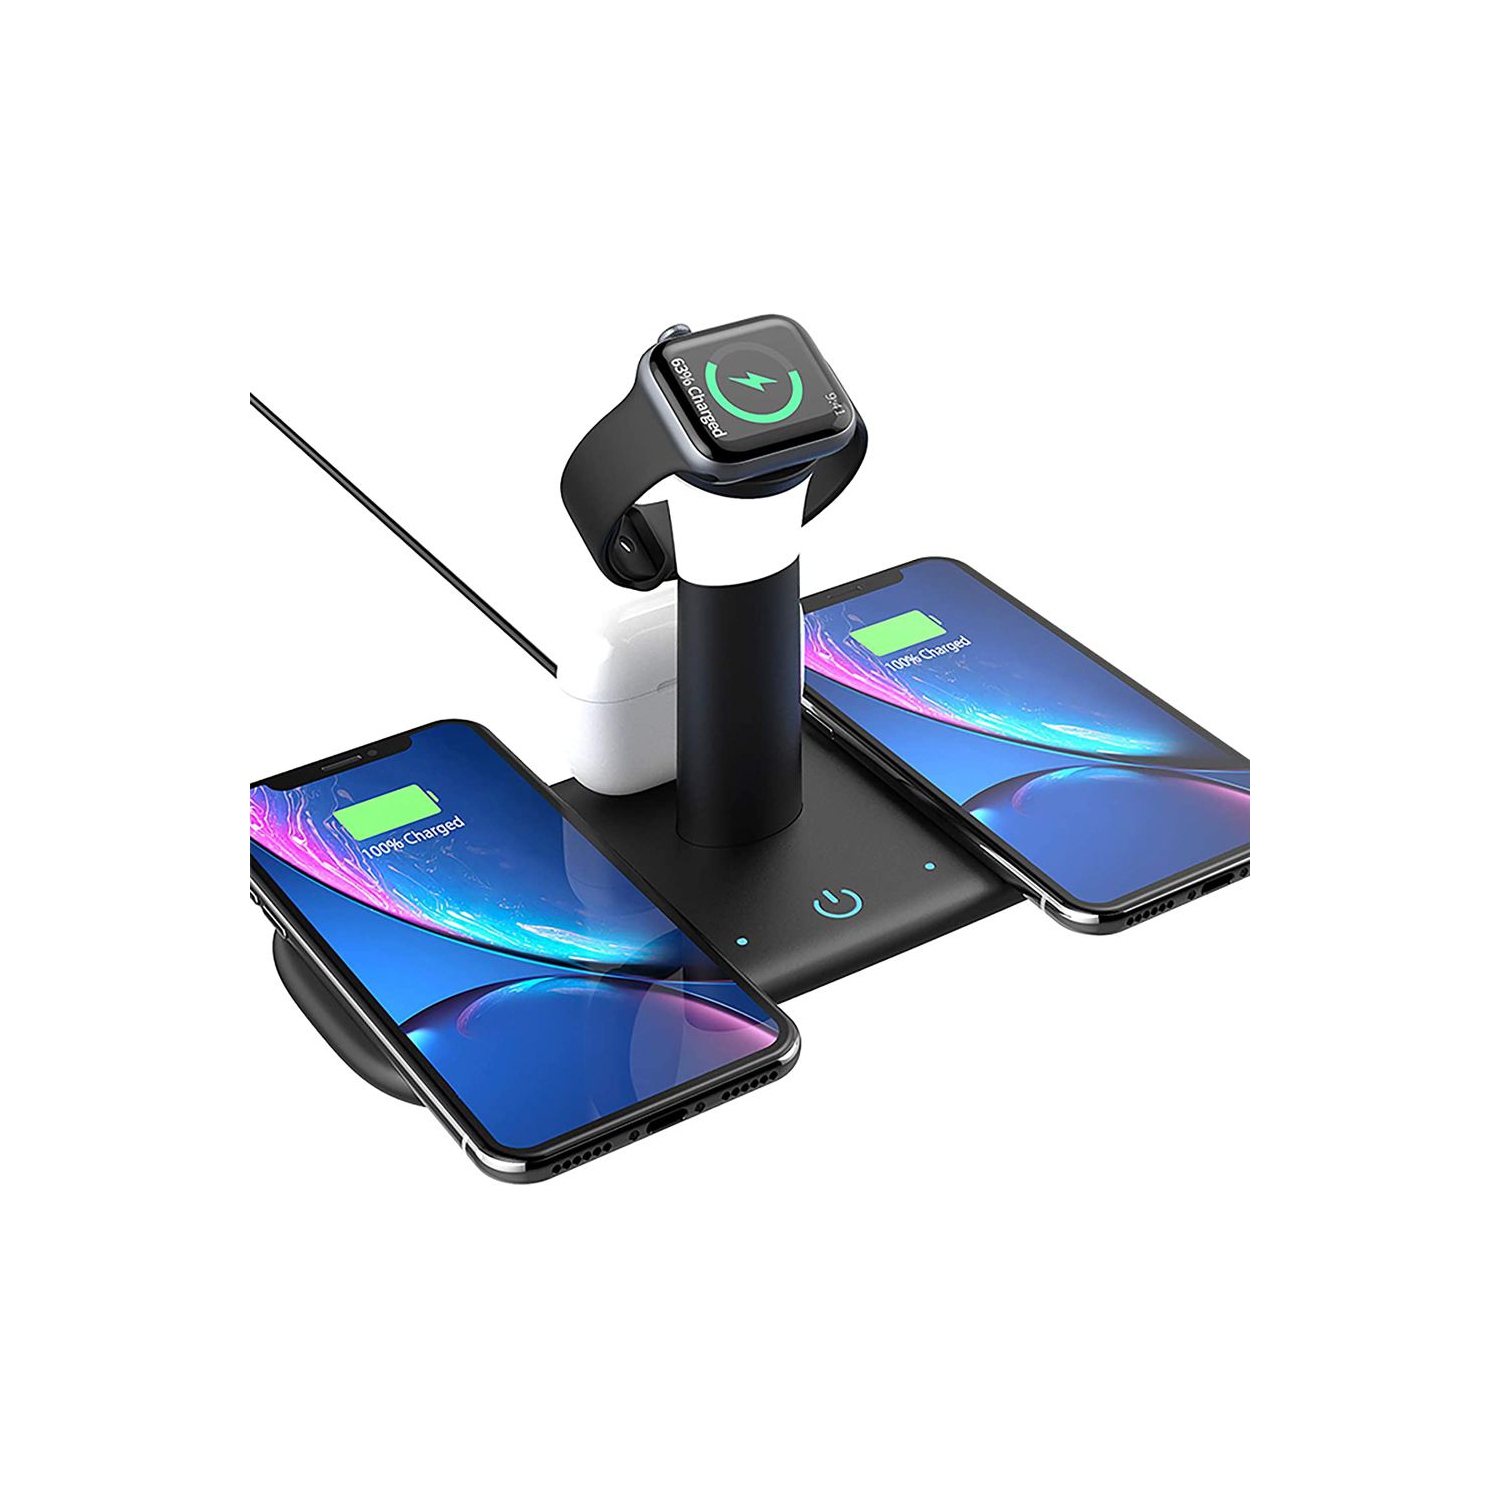 WINGOMART 5 in 1 Wireless Fast Charging Dock with Night Light, Qi Certified for iPhone 11 Pro / Xs / Xr / 8, Samsung, Apple watch & Airpods - BLACK